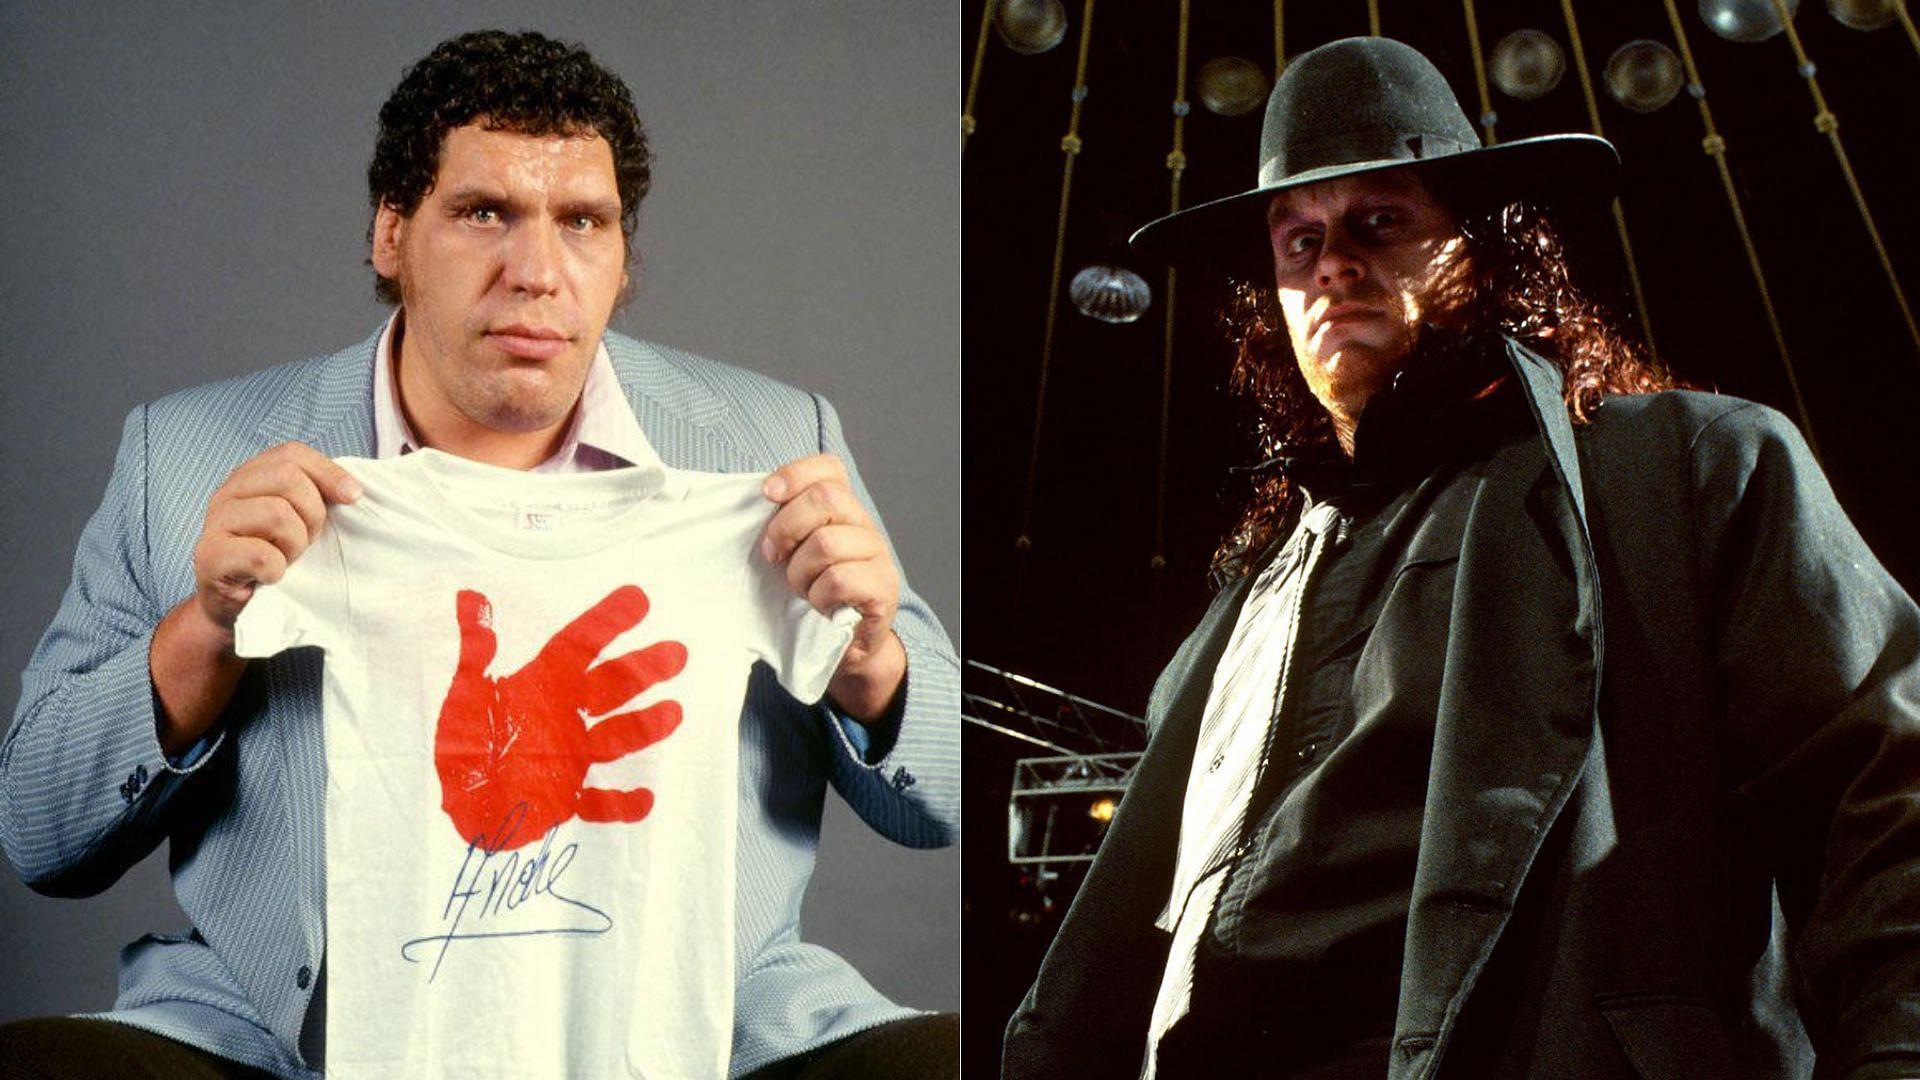 Andre the Giant (left); The Undertaker (right)